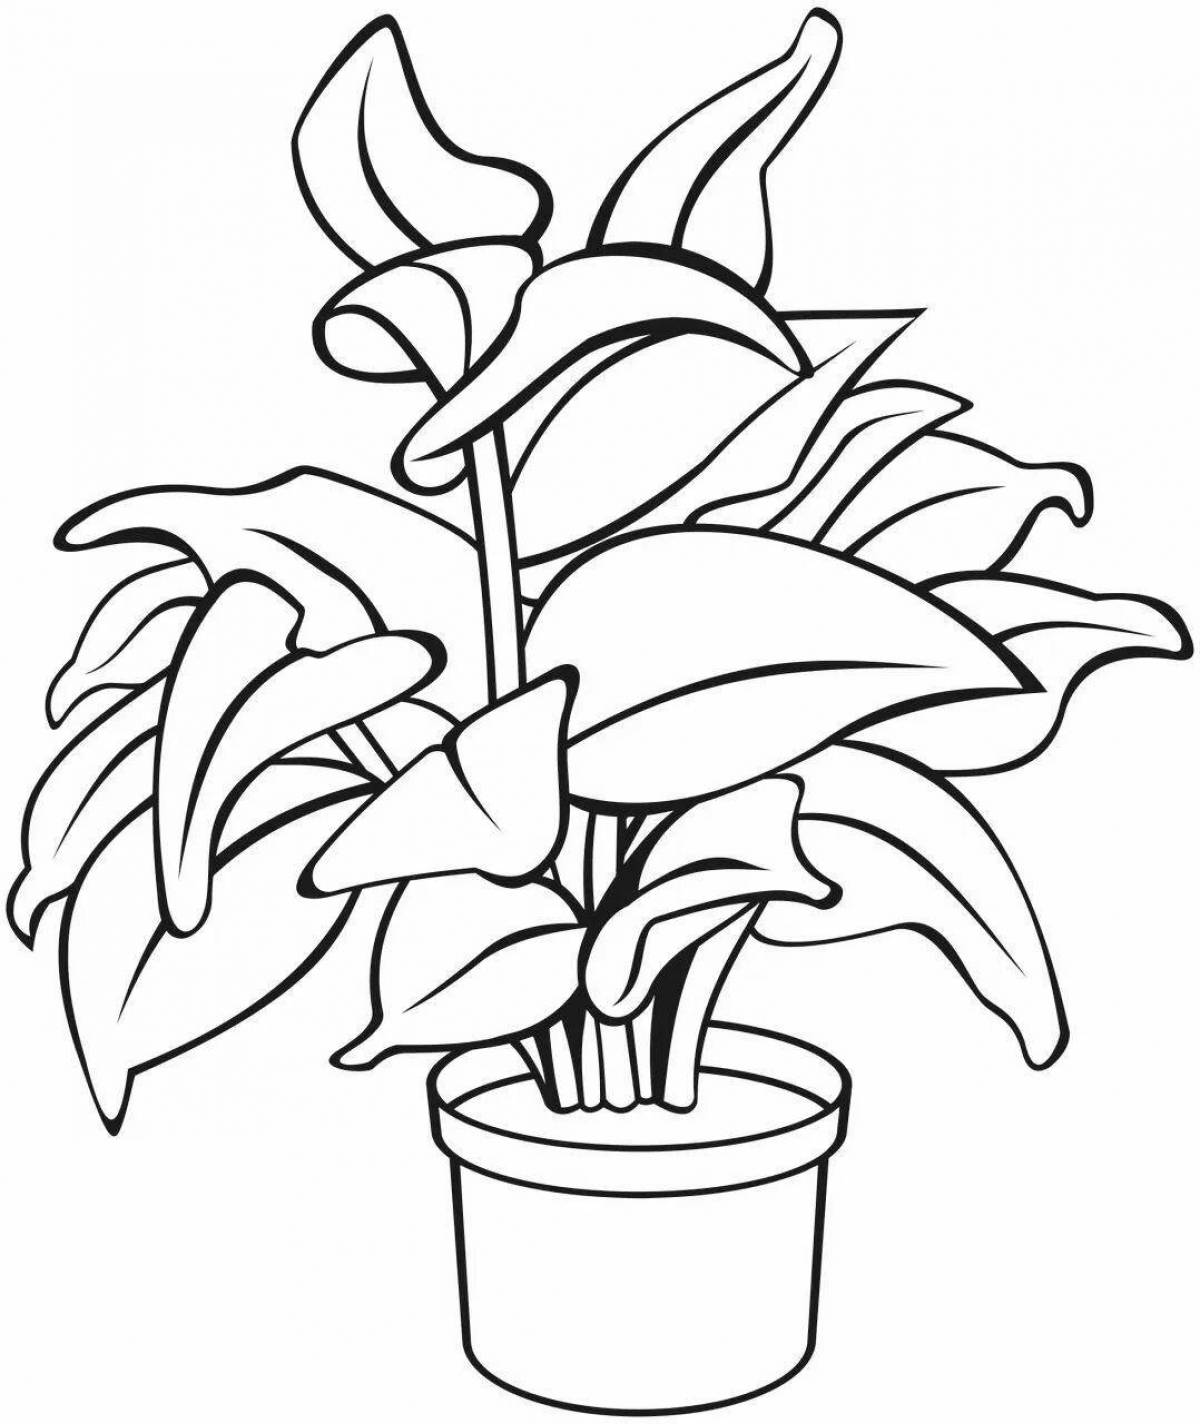 A fun coloring book for students to color ficus